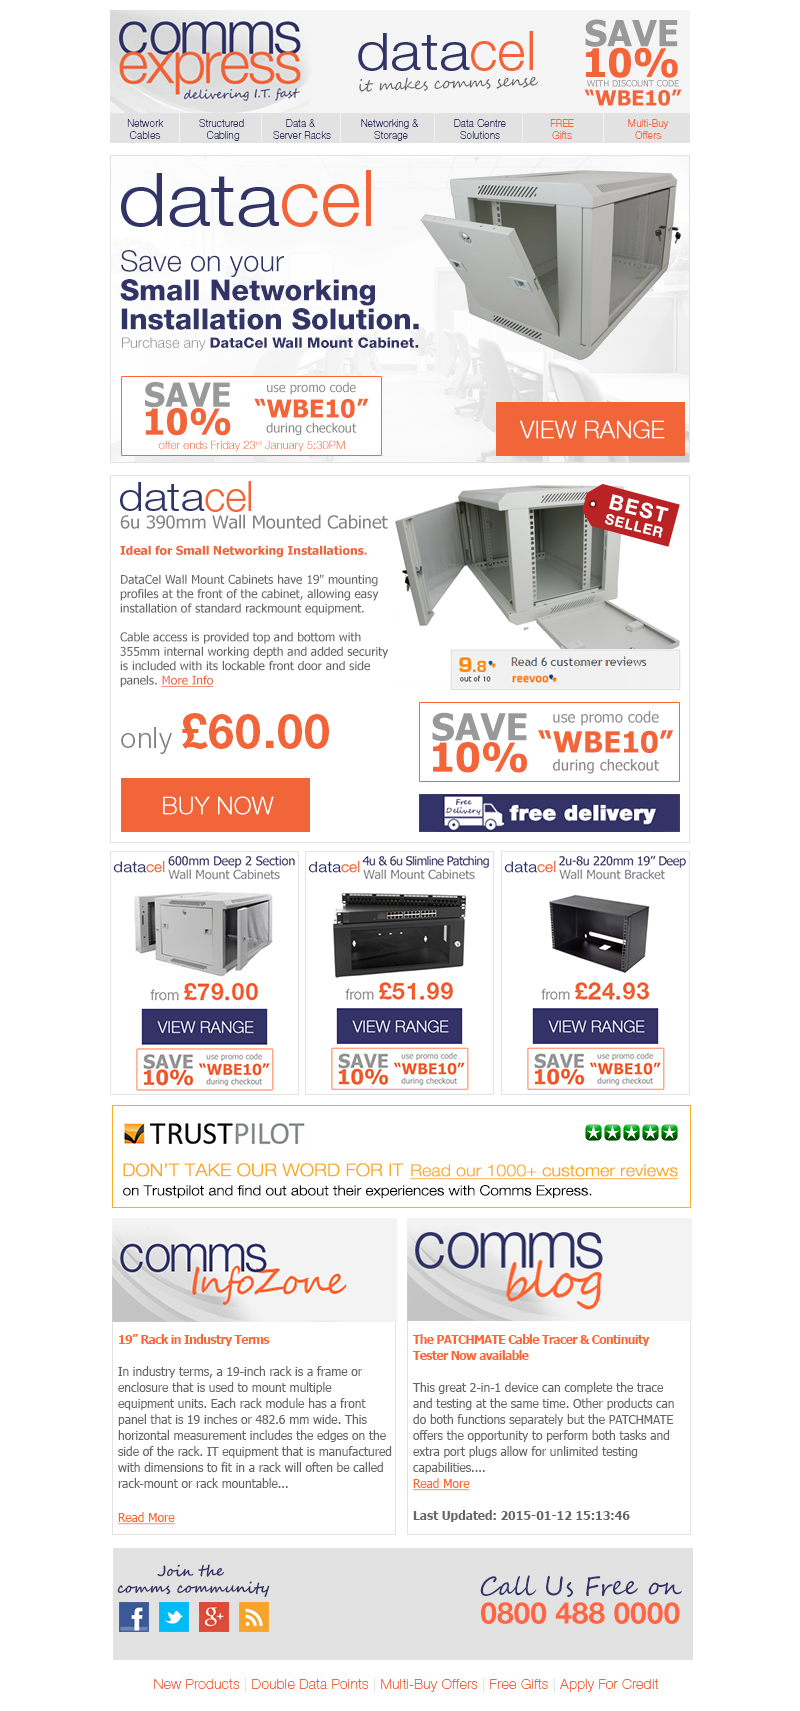 Save 10% on DataCel Wall Mount Data Cabinets